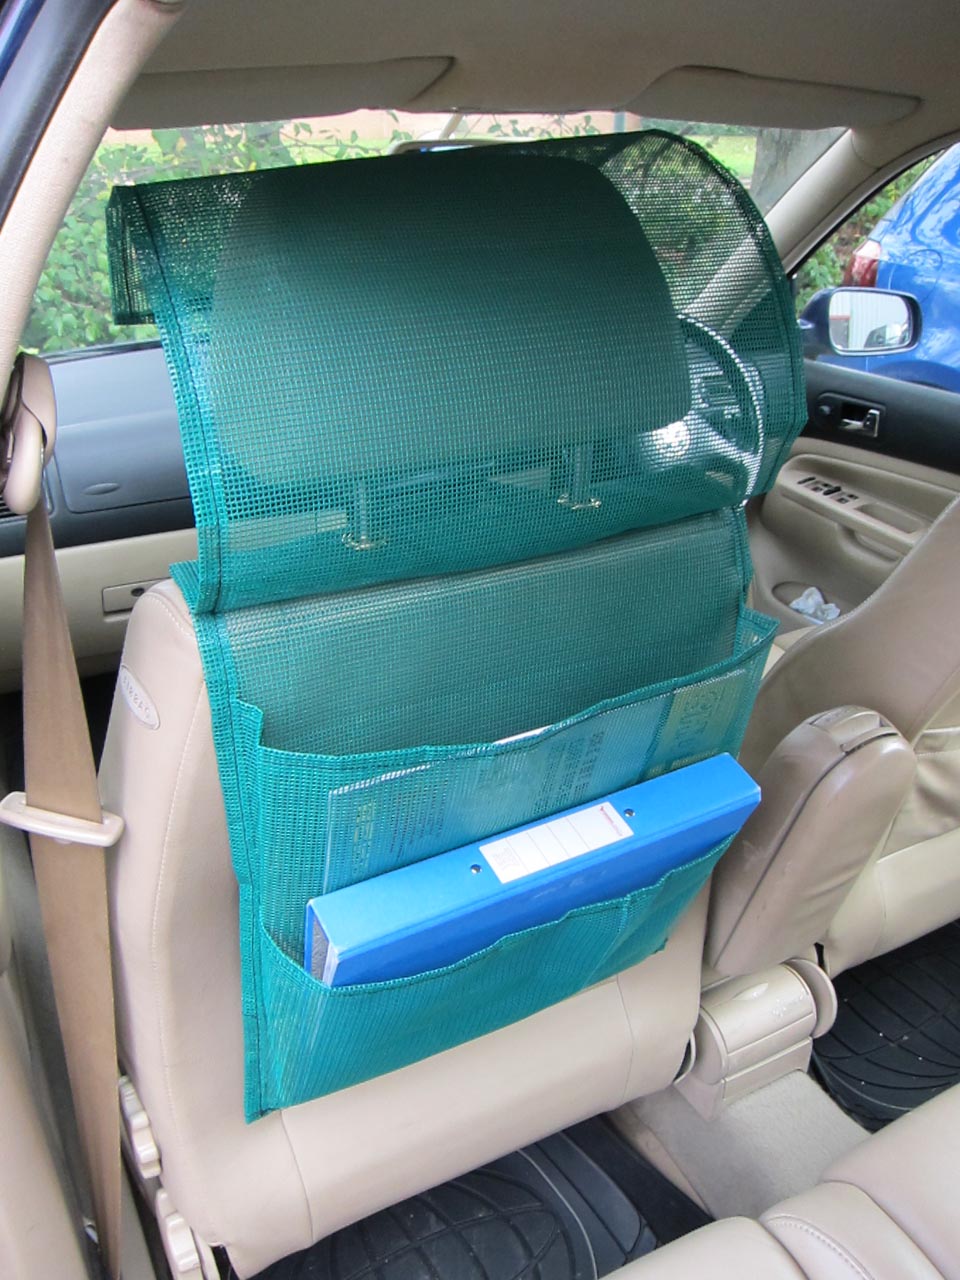 Open view of a bespoke green mesh document pocket organiser for use behind a car seat or in a commercial vehicle.